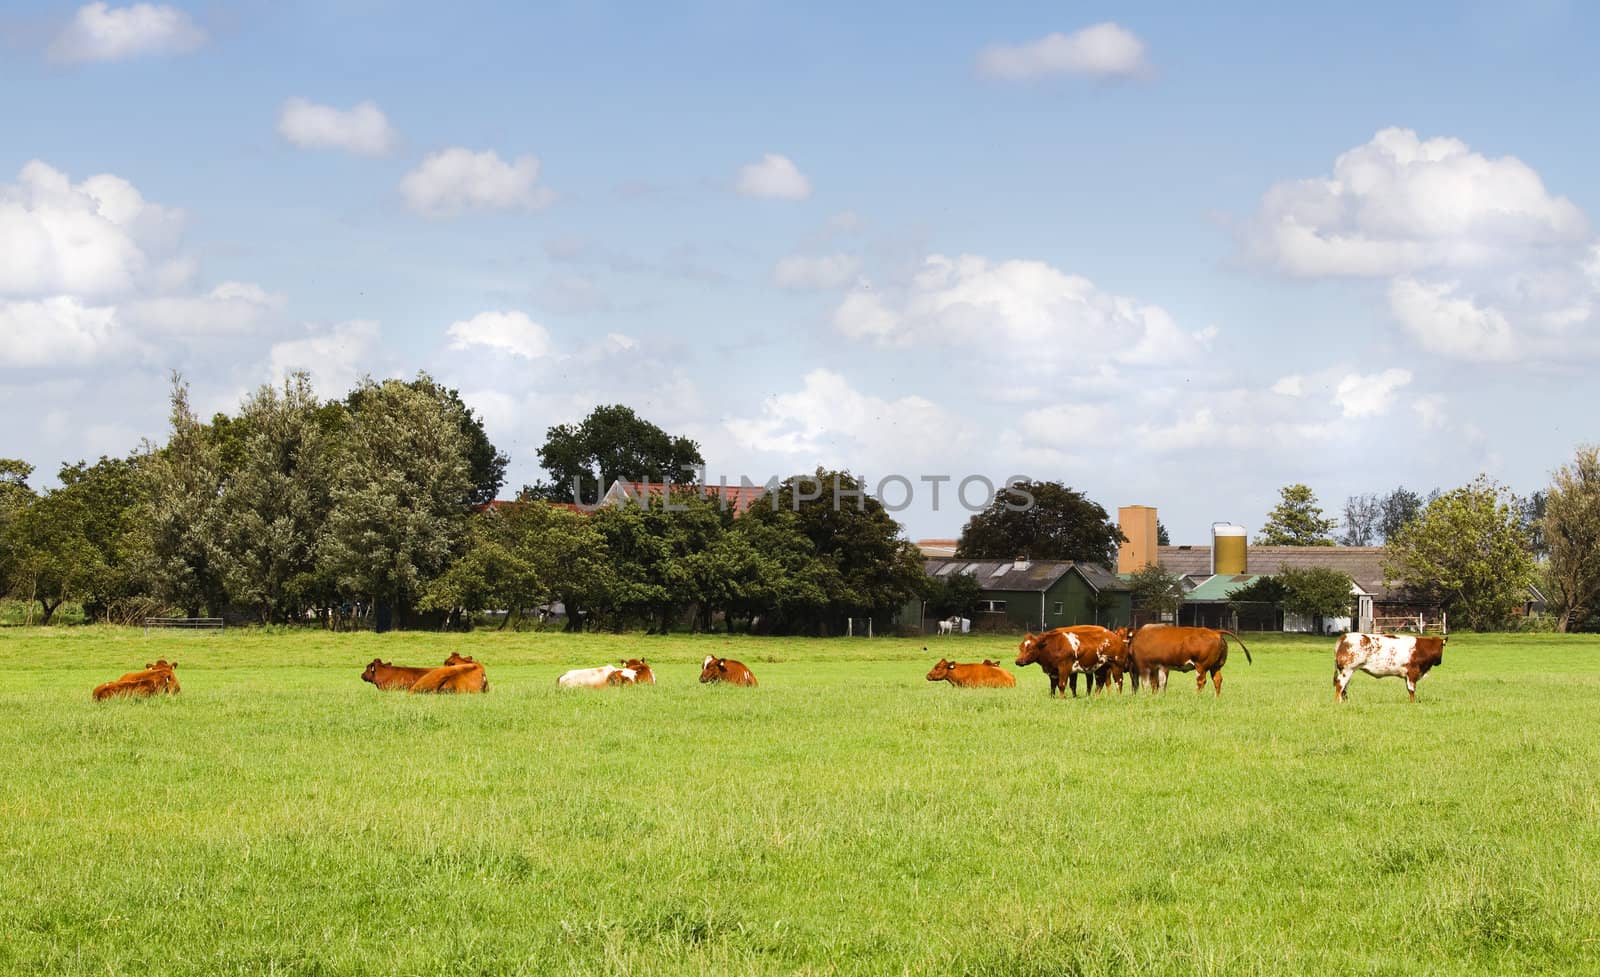 Countrylandscape in summer with meadows, farms and cows